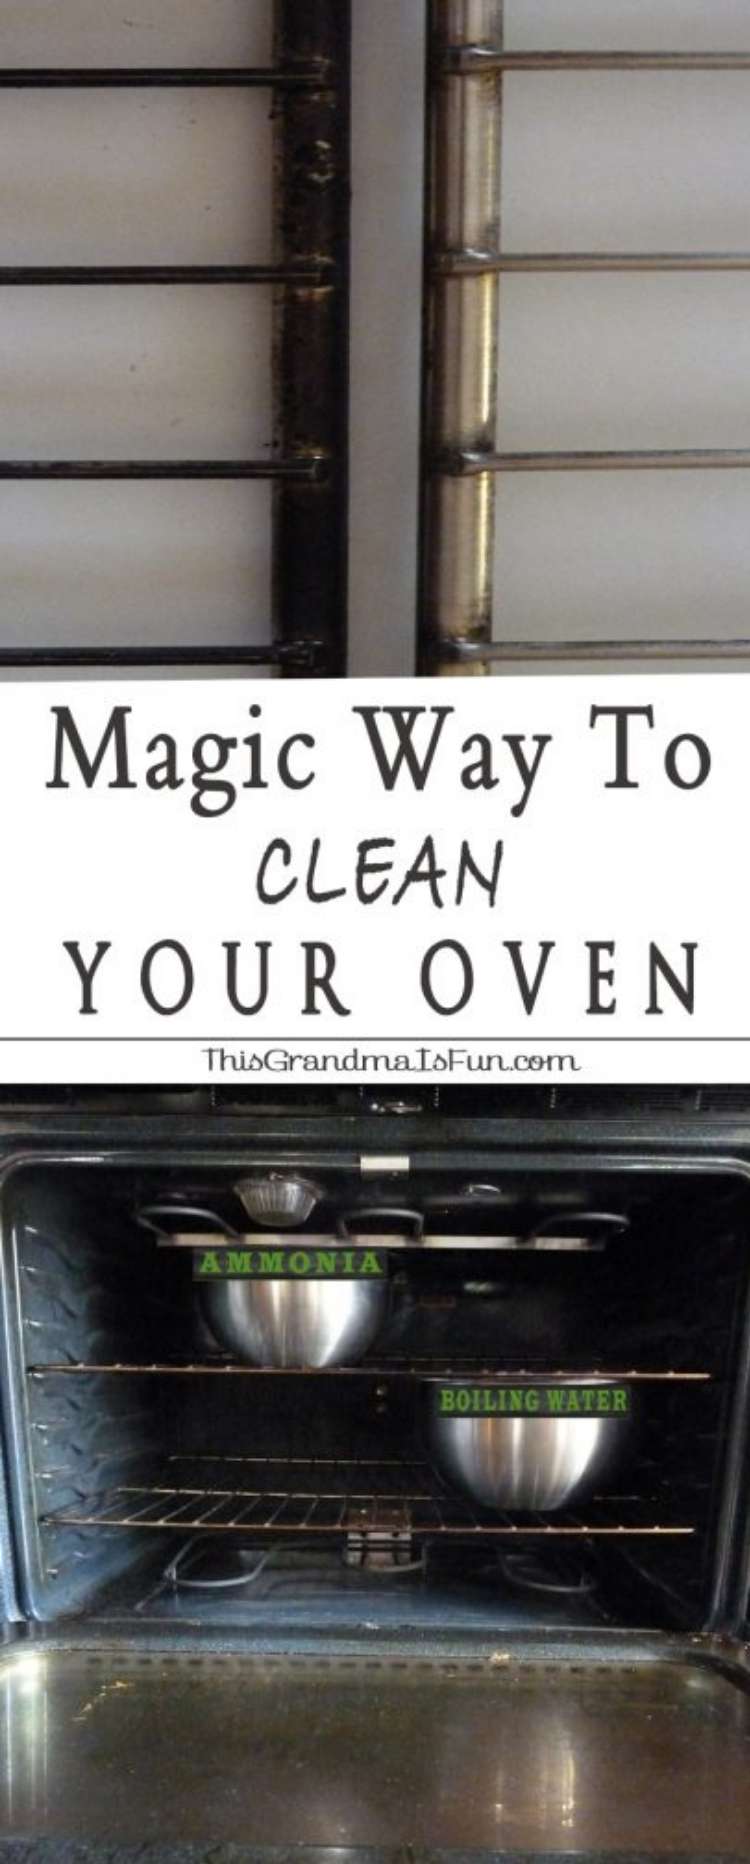 Oven Cleaning This Grandma Is Fun Pinterest graphic before and after oven racks cleaned open oven with bowls of ammonia and boiling water to be left overnight to clean